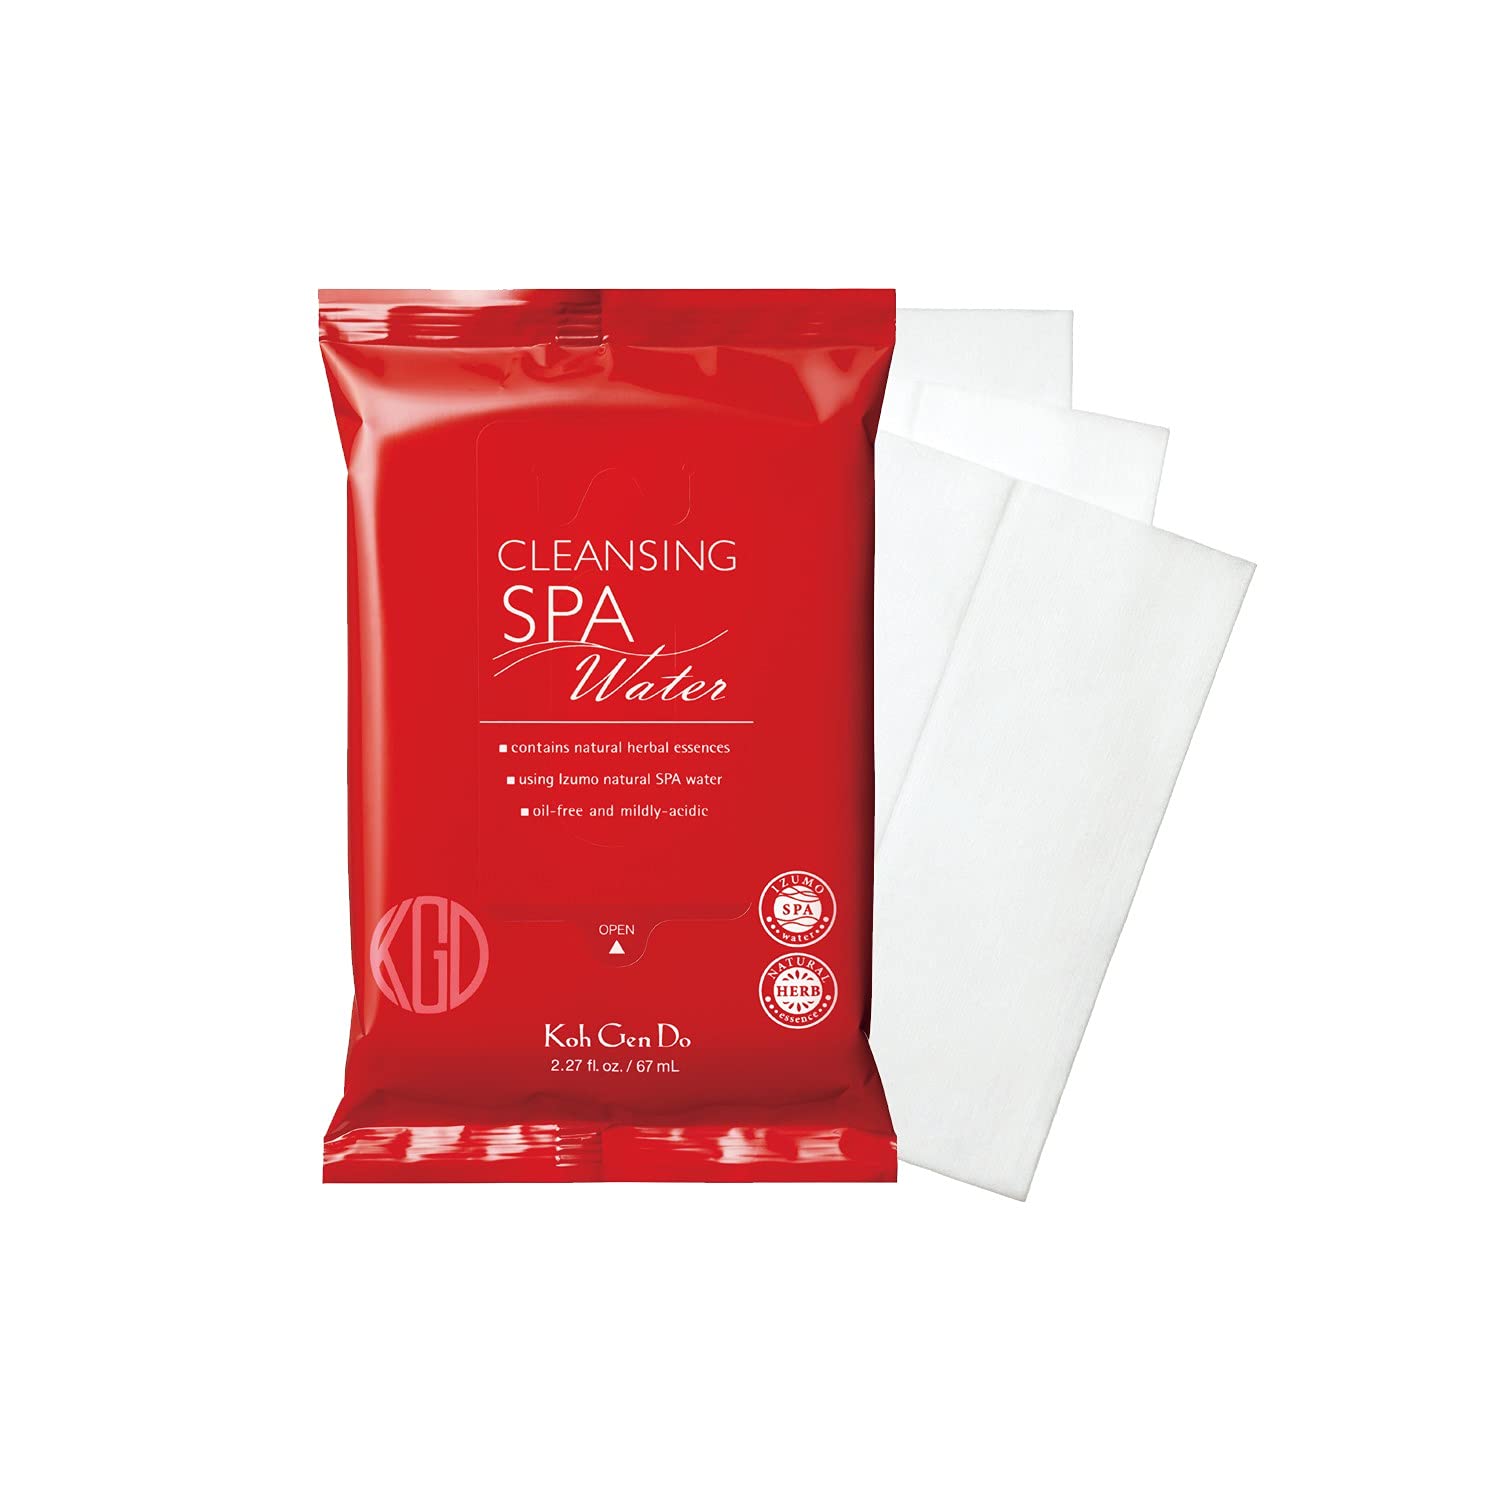 Koh Gen Do Spa Cleansing Water Cloth